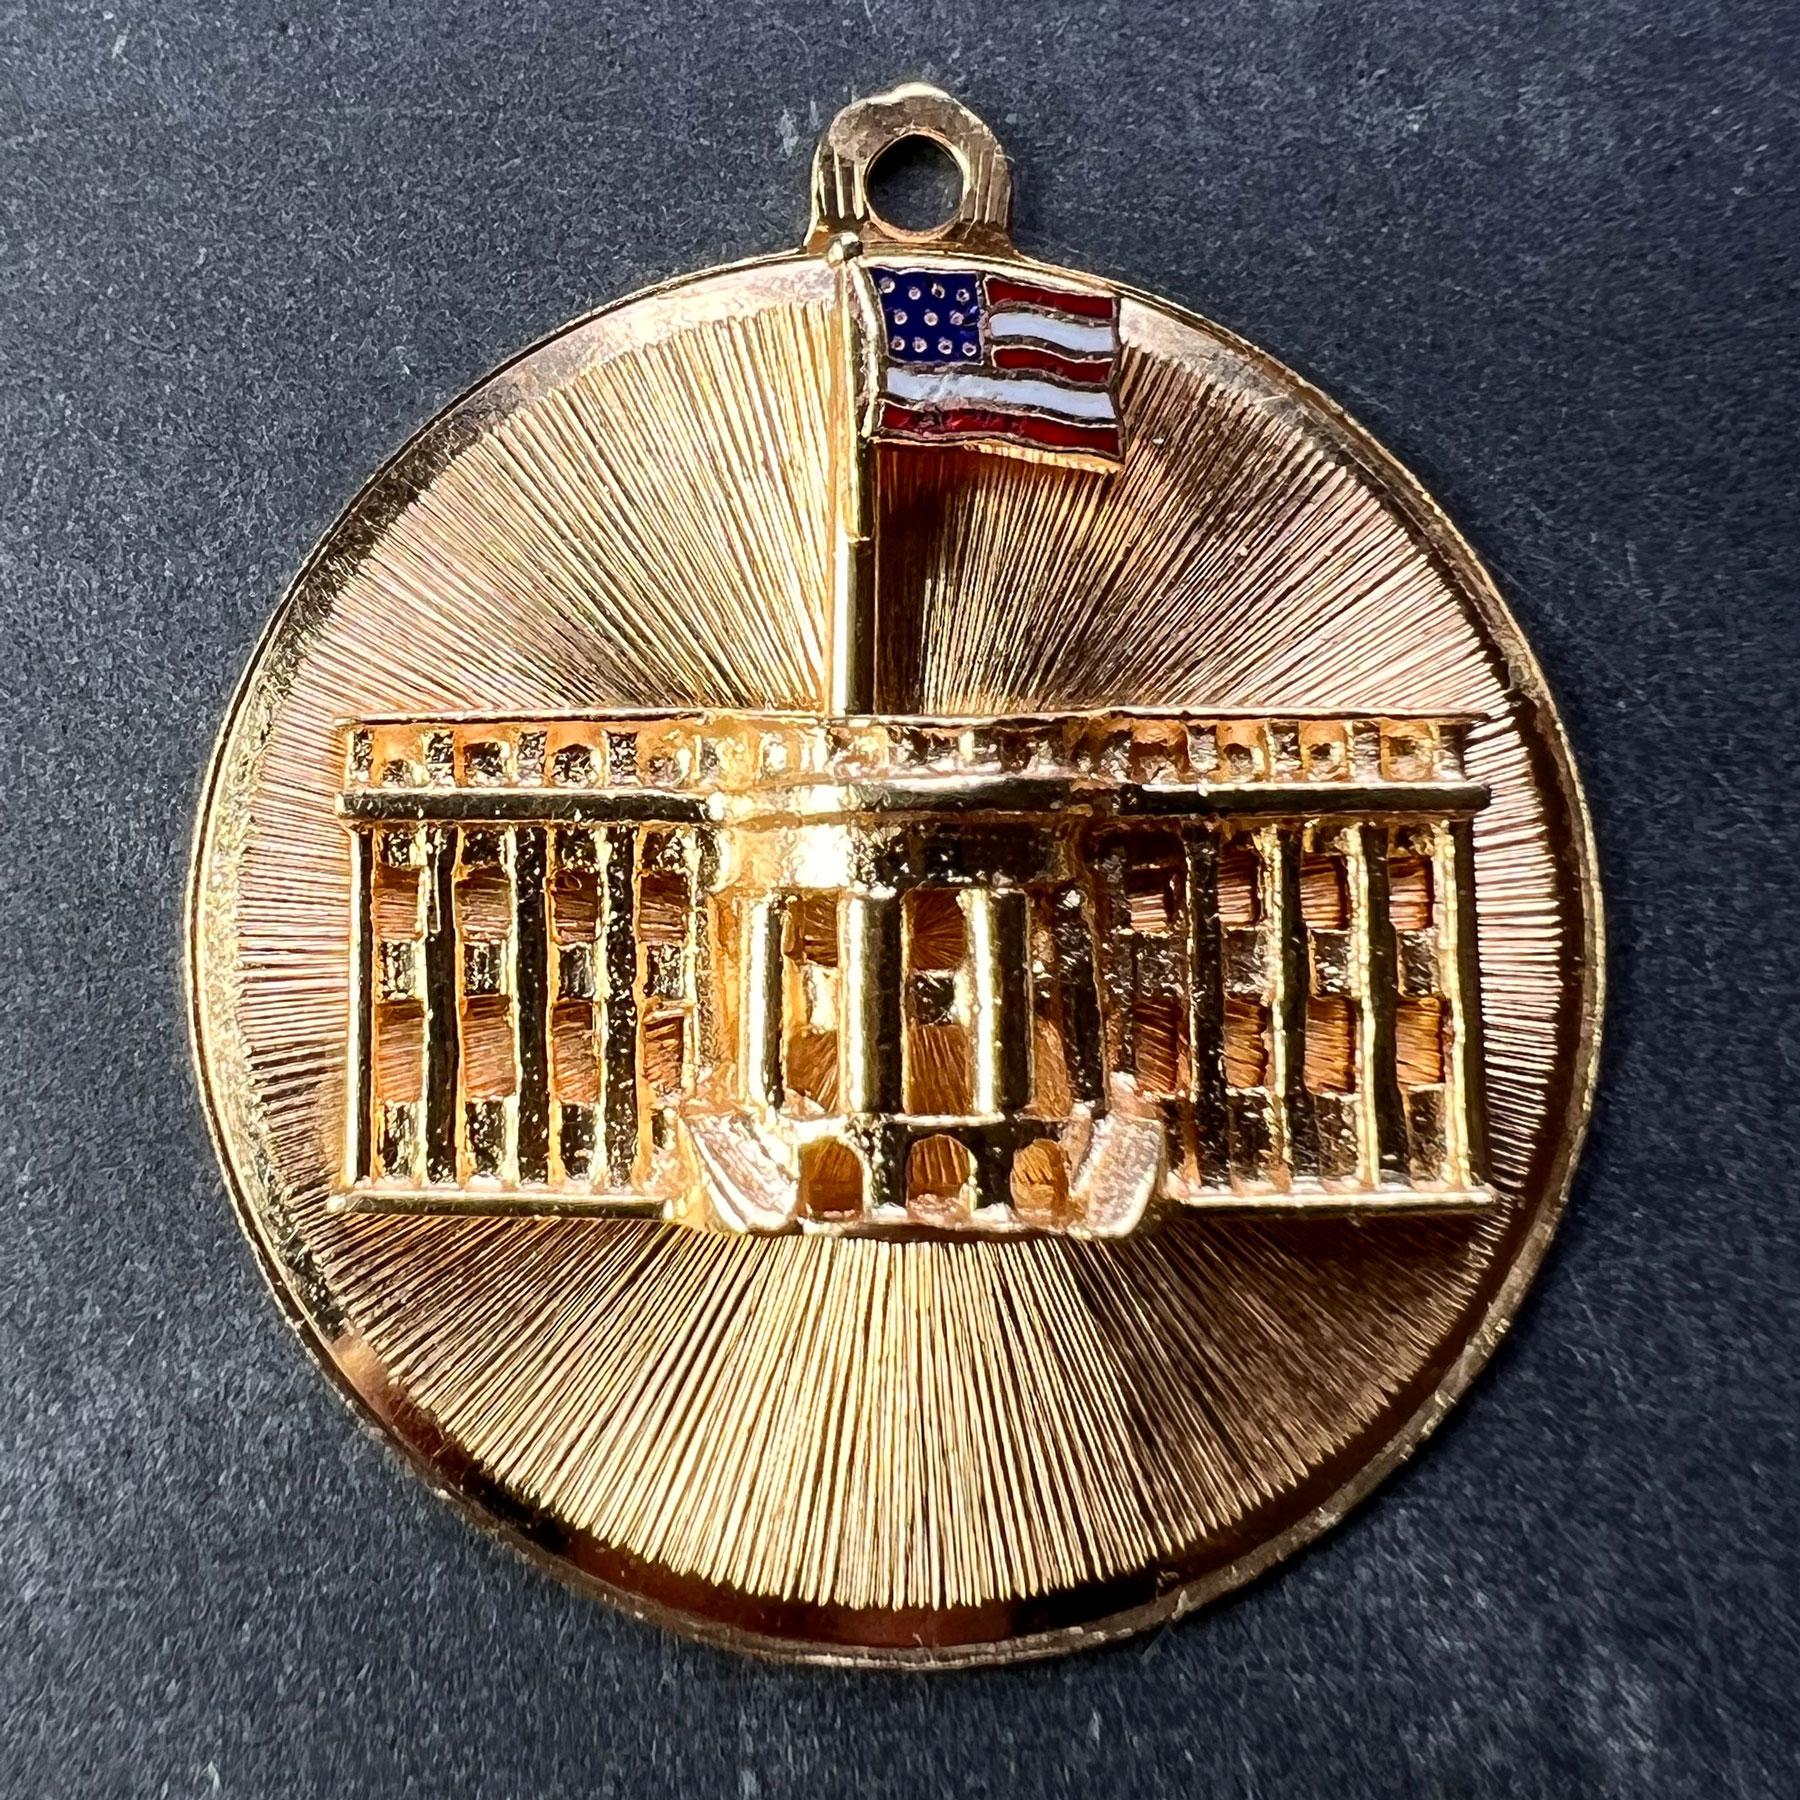 A 14 karat (14K) yellow gold patriotic charm pendant depicting the White House with enamel detail to the American Flag. Signed AC and stamped 14K for 14 karat gold.

Dimensions: 2.9 x 2.6 x 0.45 cm 
Weight: 5.14 grams
(Chain not included)
